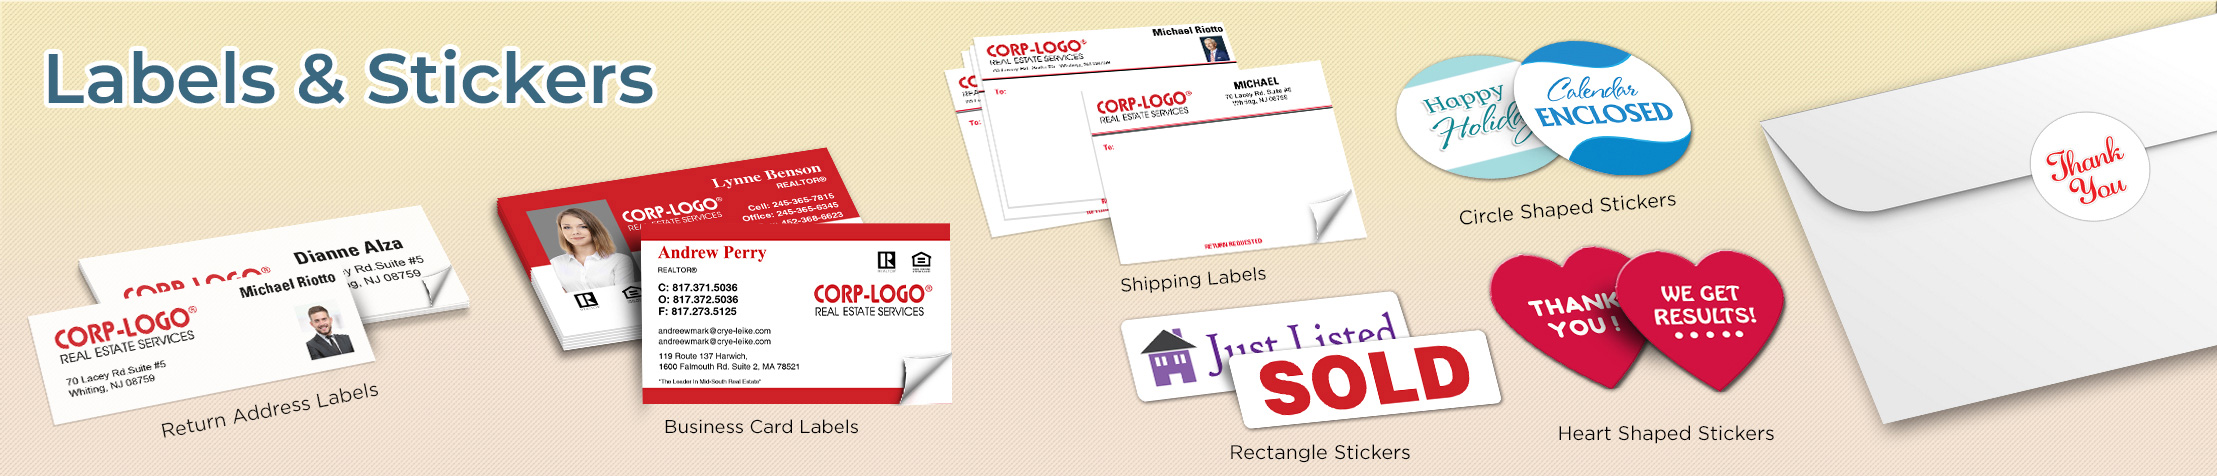 Crye-Leike Realtors Real Estate Labels and Stickers - Crye-Leike Realtors  business card labels, return address labels, shipping labels, and assorted stickers | BestPrintBuy.com